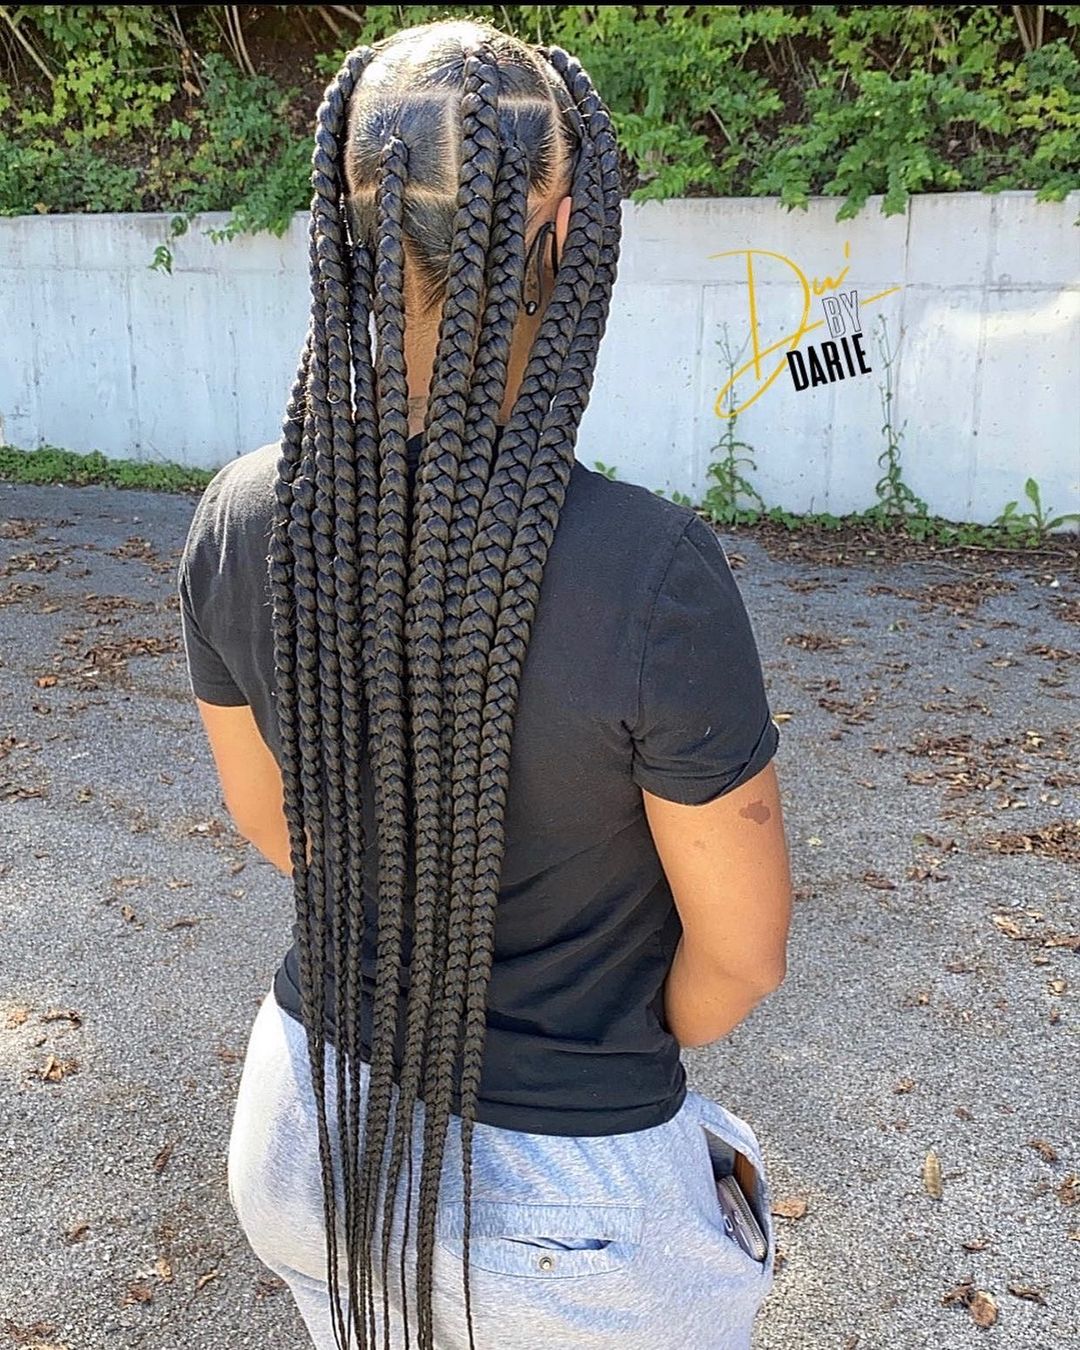 20 Cute Knotless Braids Hairstyles 2021 Fabulous Knotless Box Braids Styles Pictures 